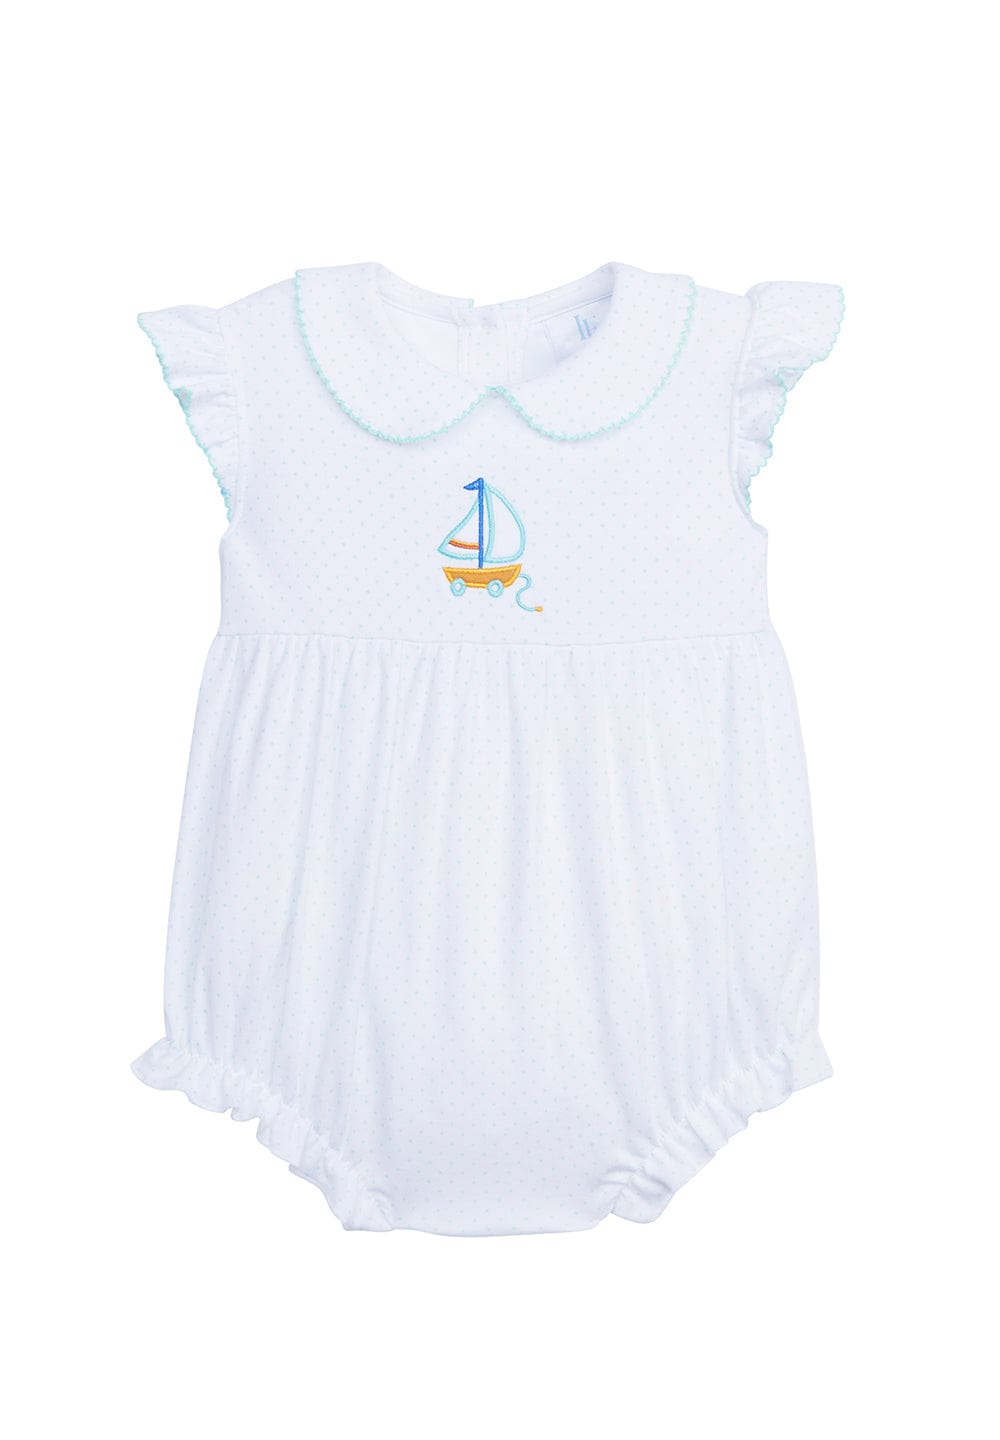 classic childrens clothing girls bubble with peter pan collar and sailboat embroidery